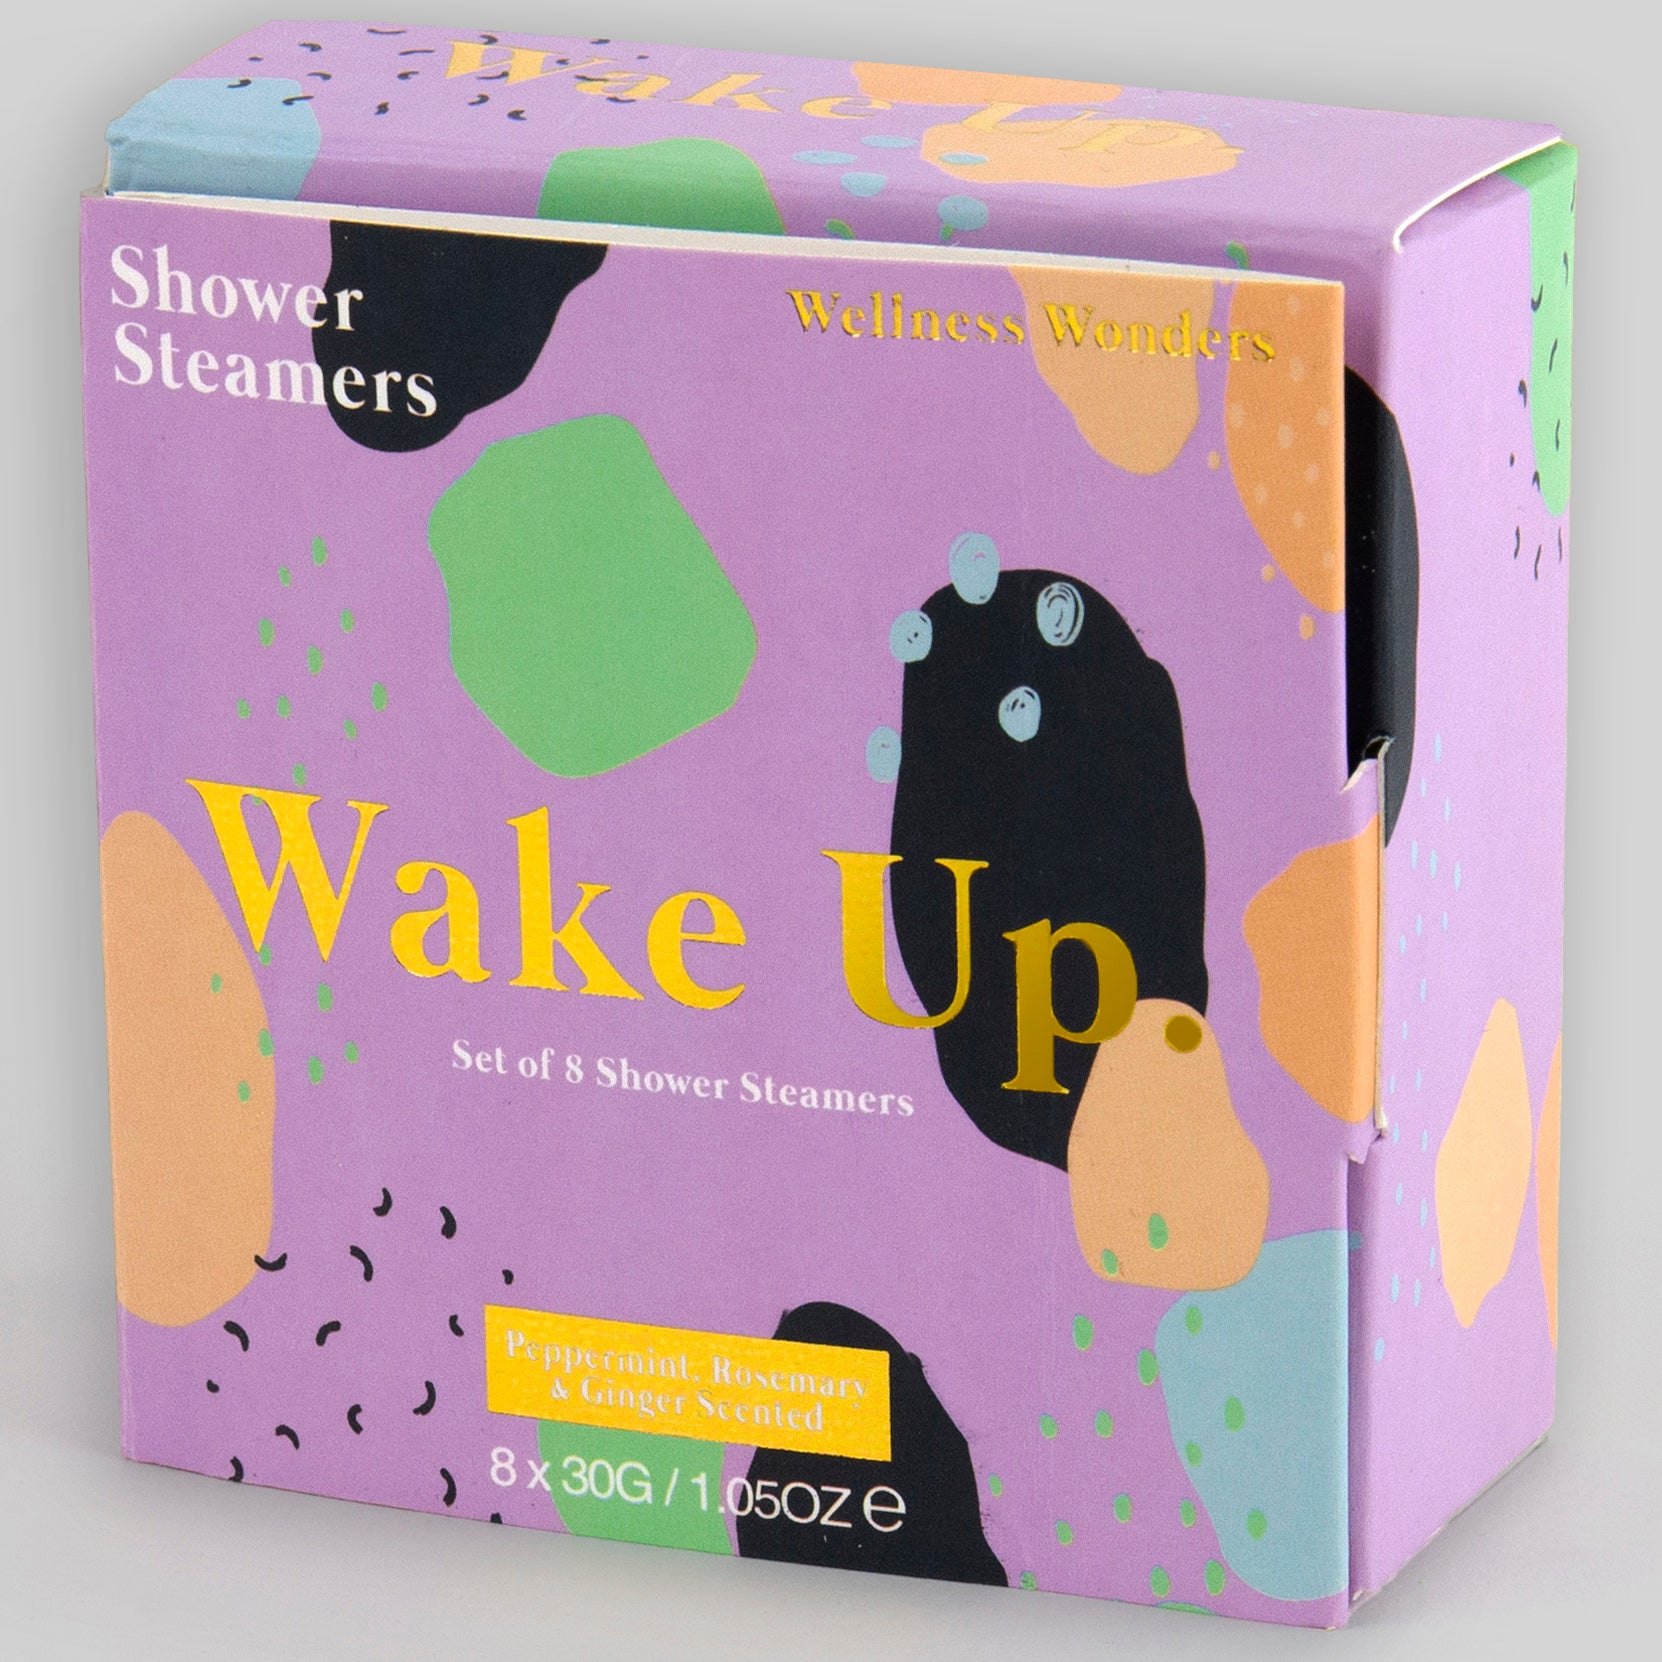 Wake Up' Aroma Shower Steamers - Pack of 8